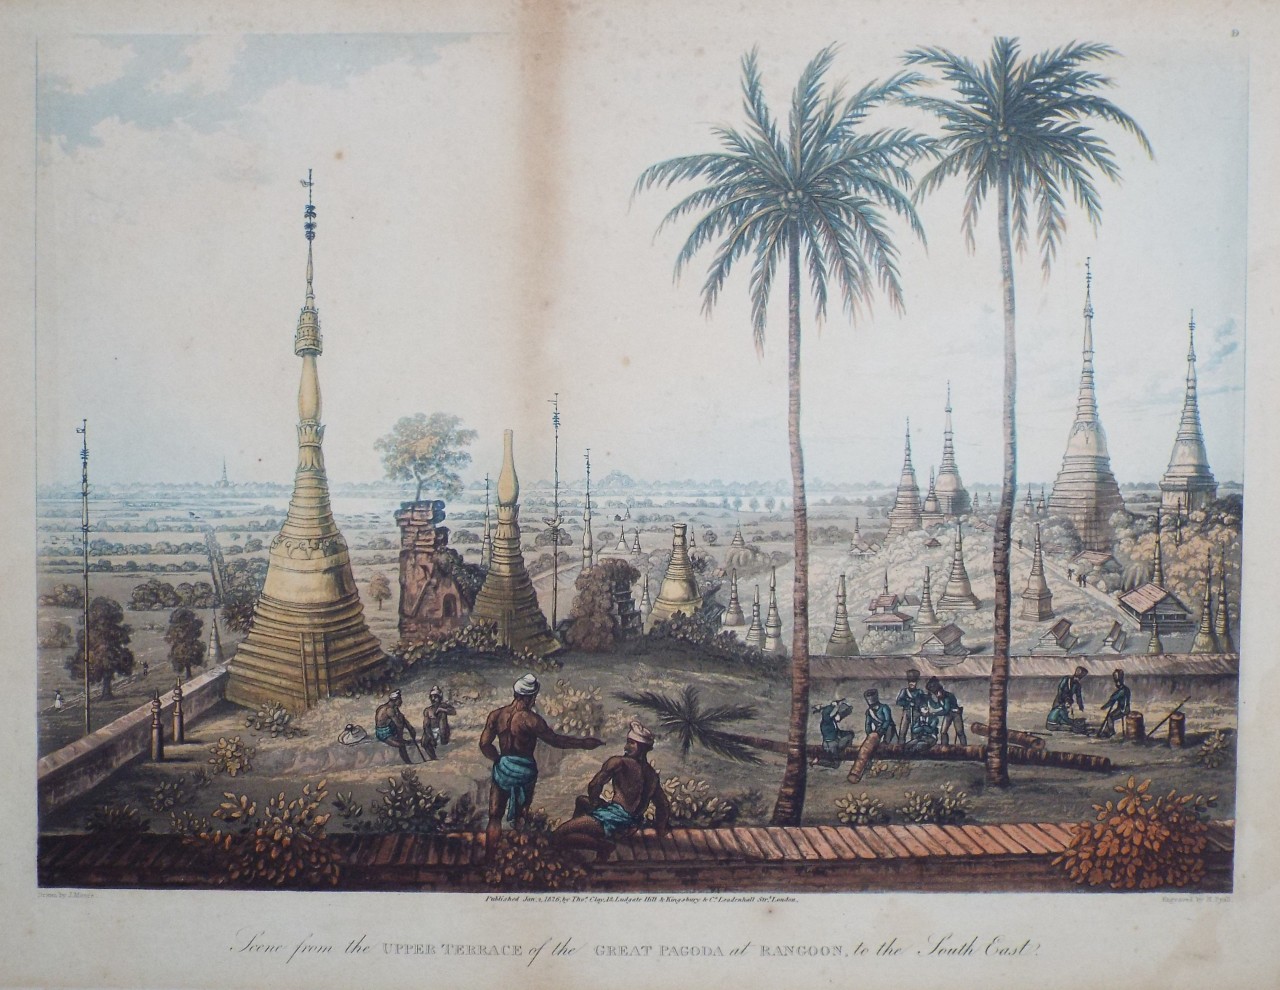 Aquatint - Scene from the Upper Terrace of the Great Pagoda at Rangoon, to the South East. - Pyall